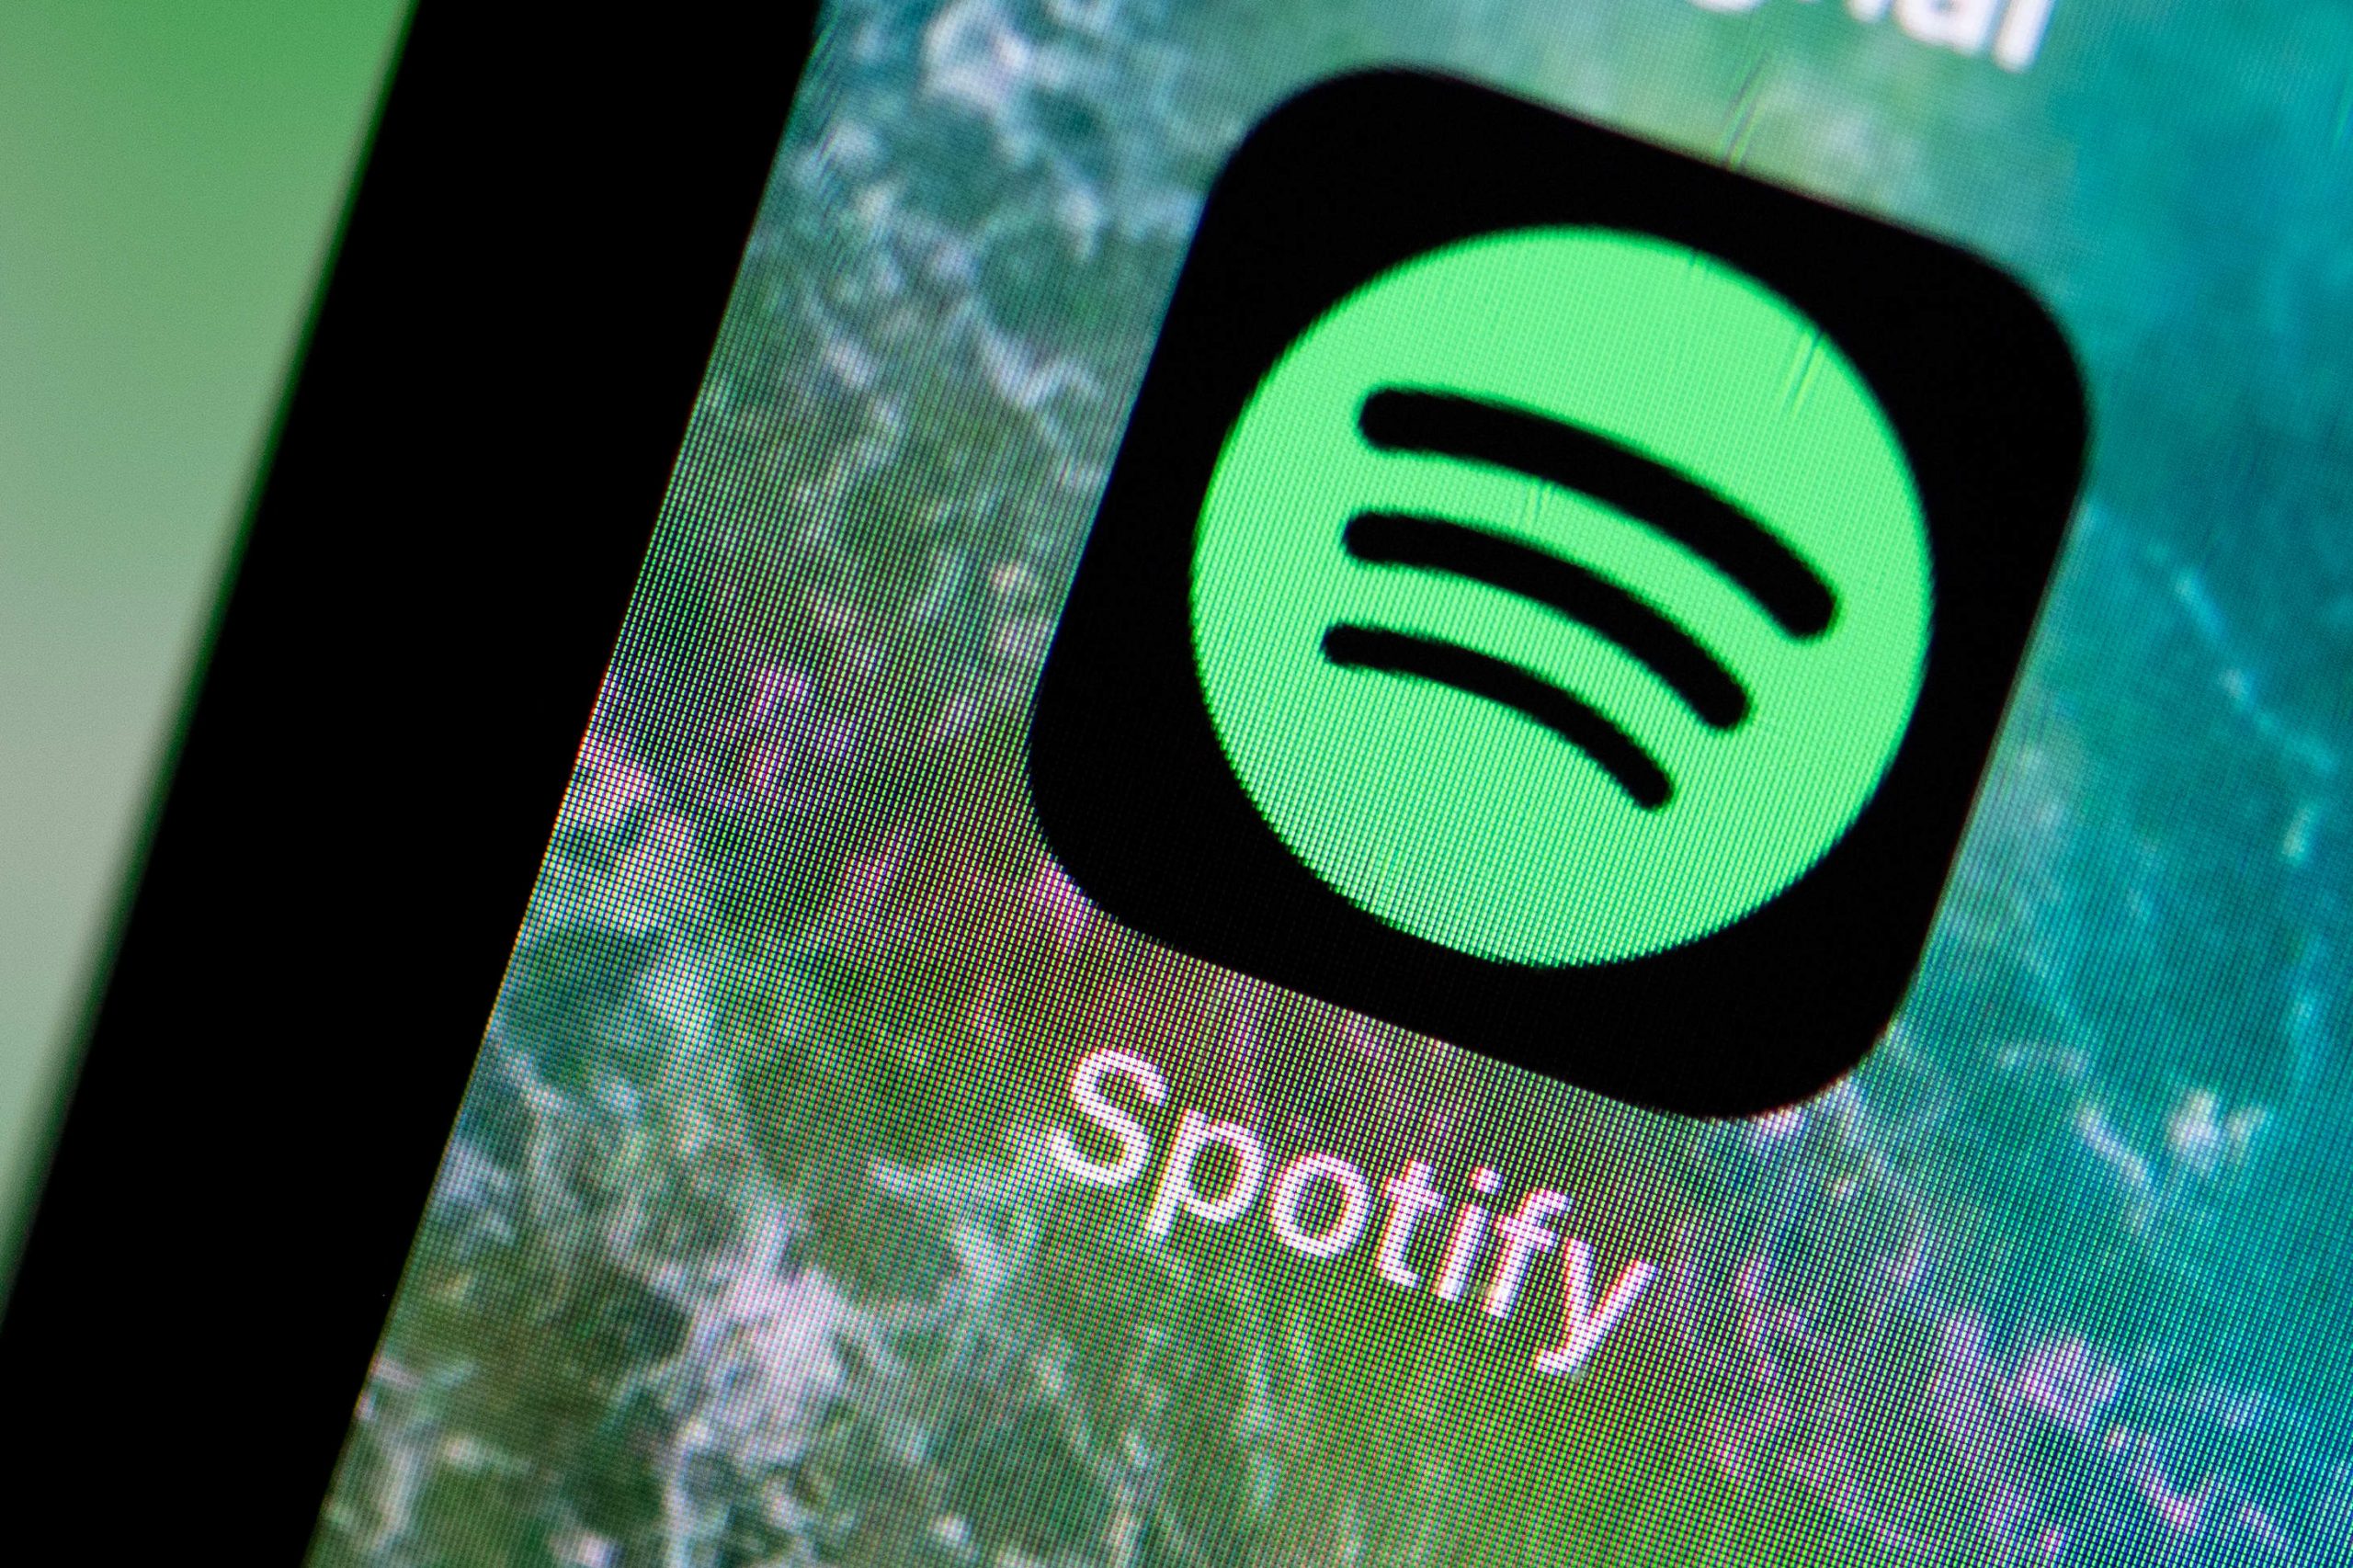 Spotify Expected to Finally Add High-Fidelity Subscription Tier This Year